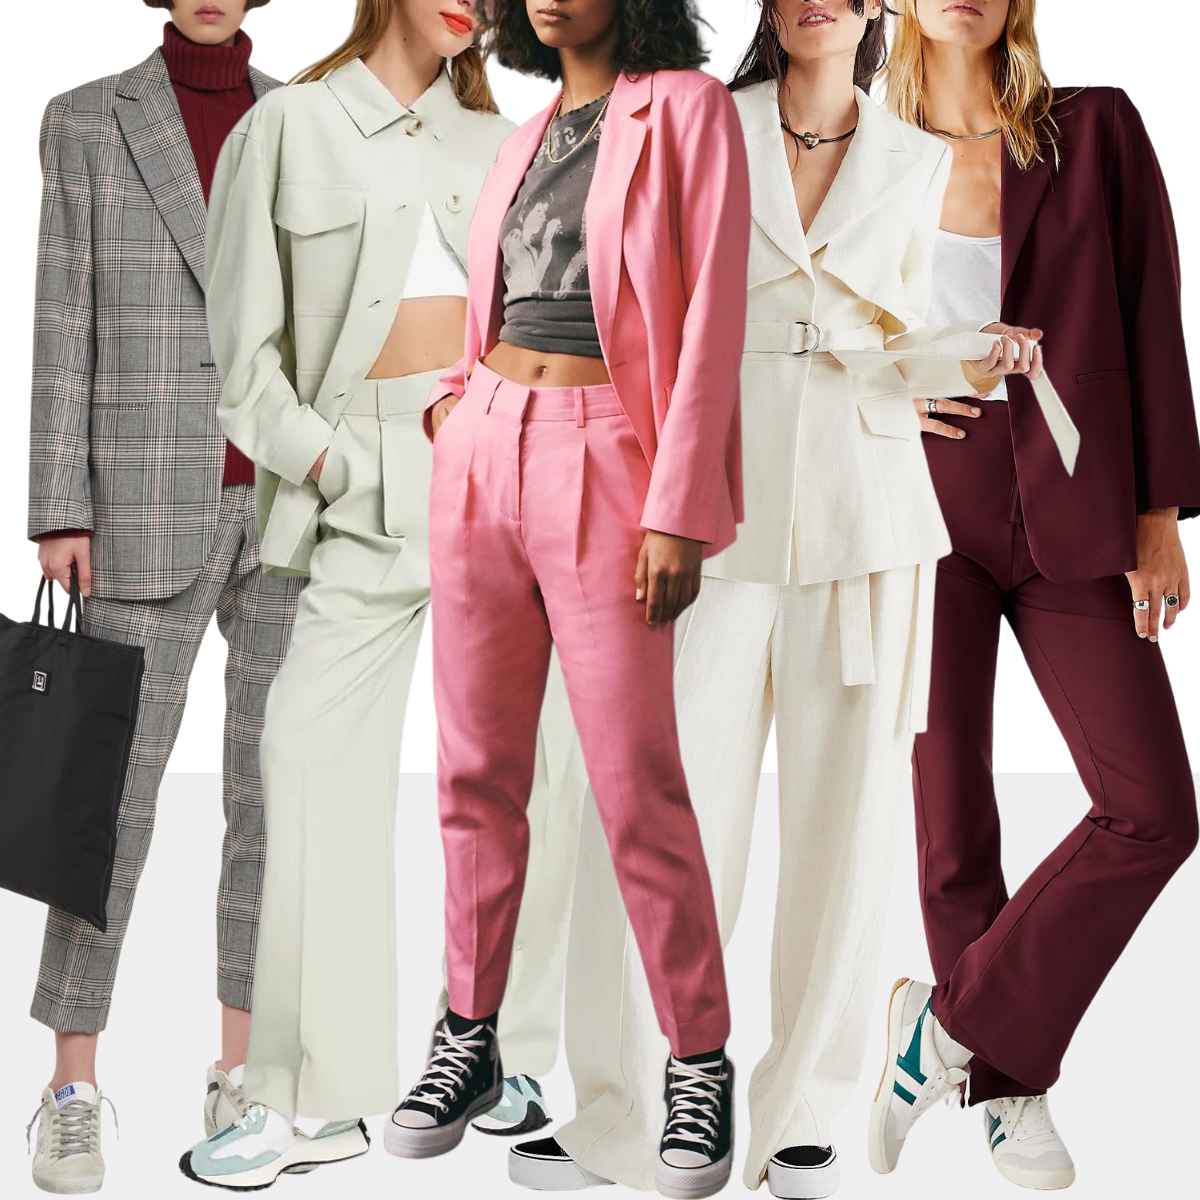 Collage of 5 women wearing various pantsuits with sneakers.